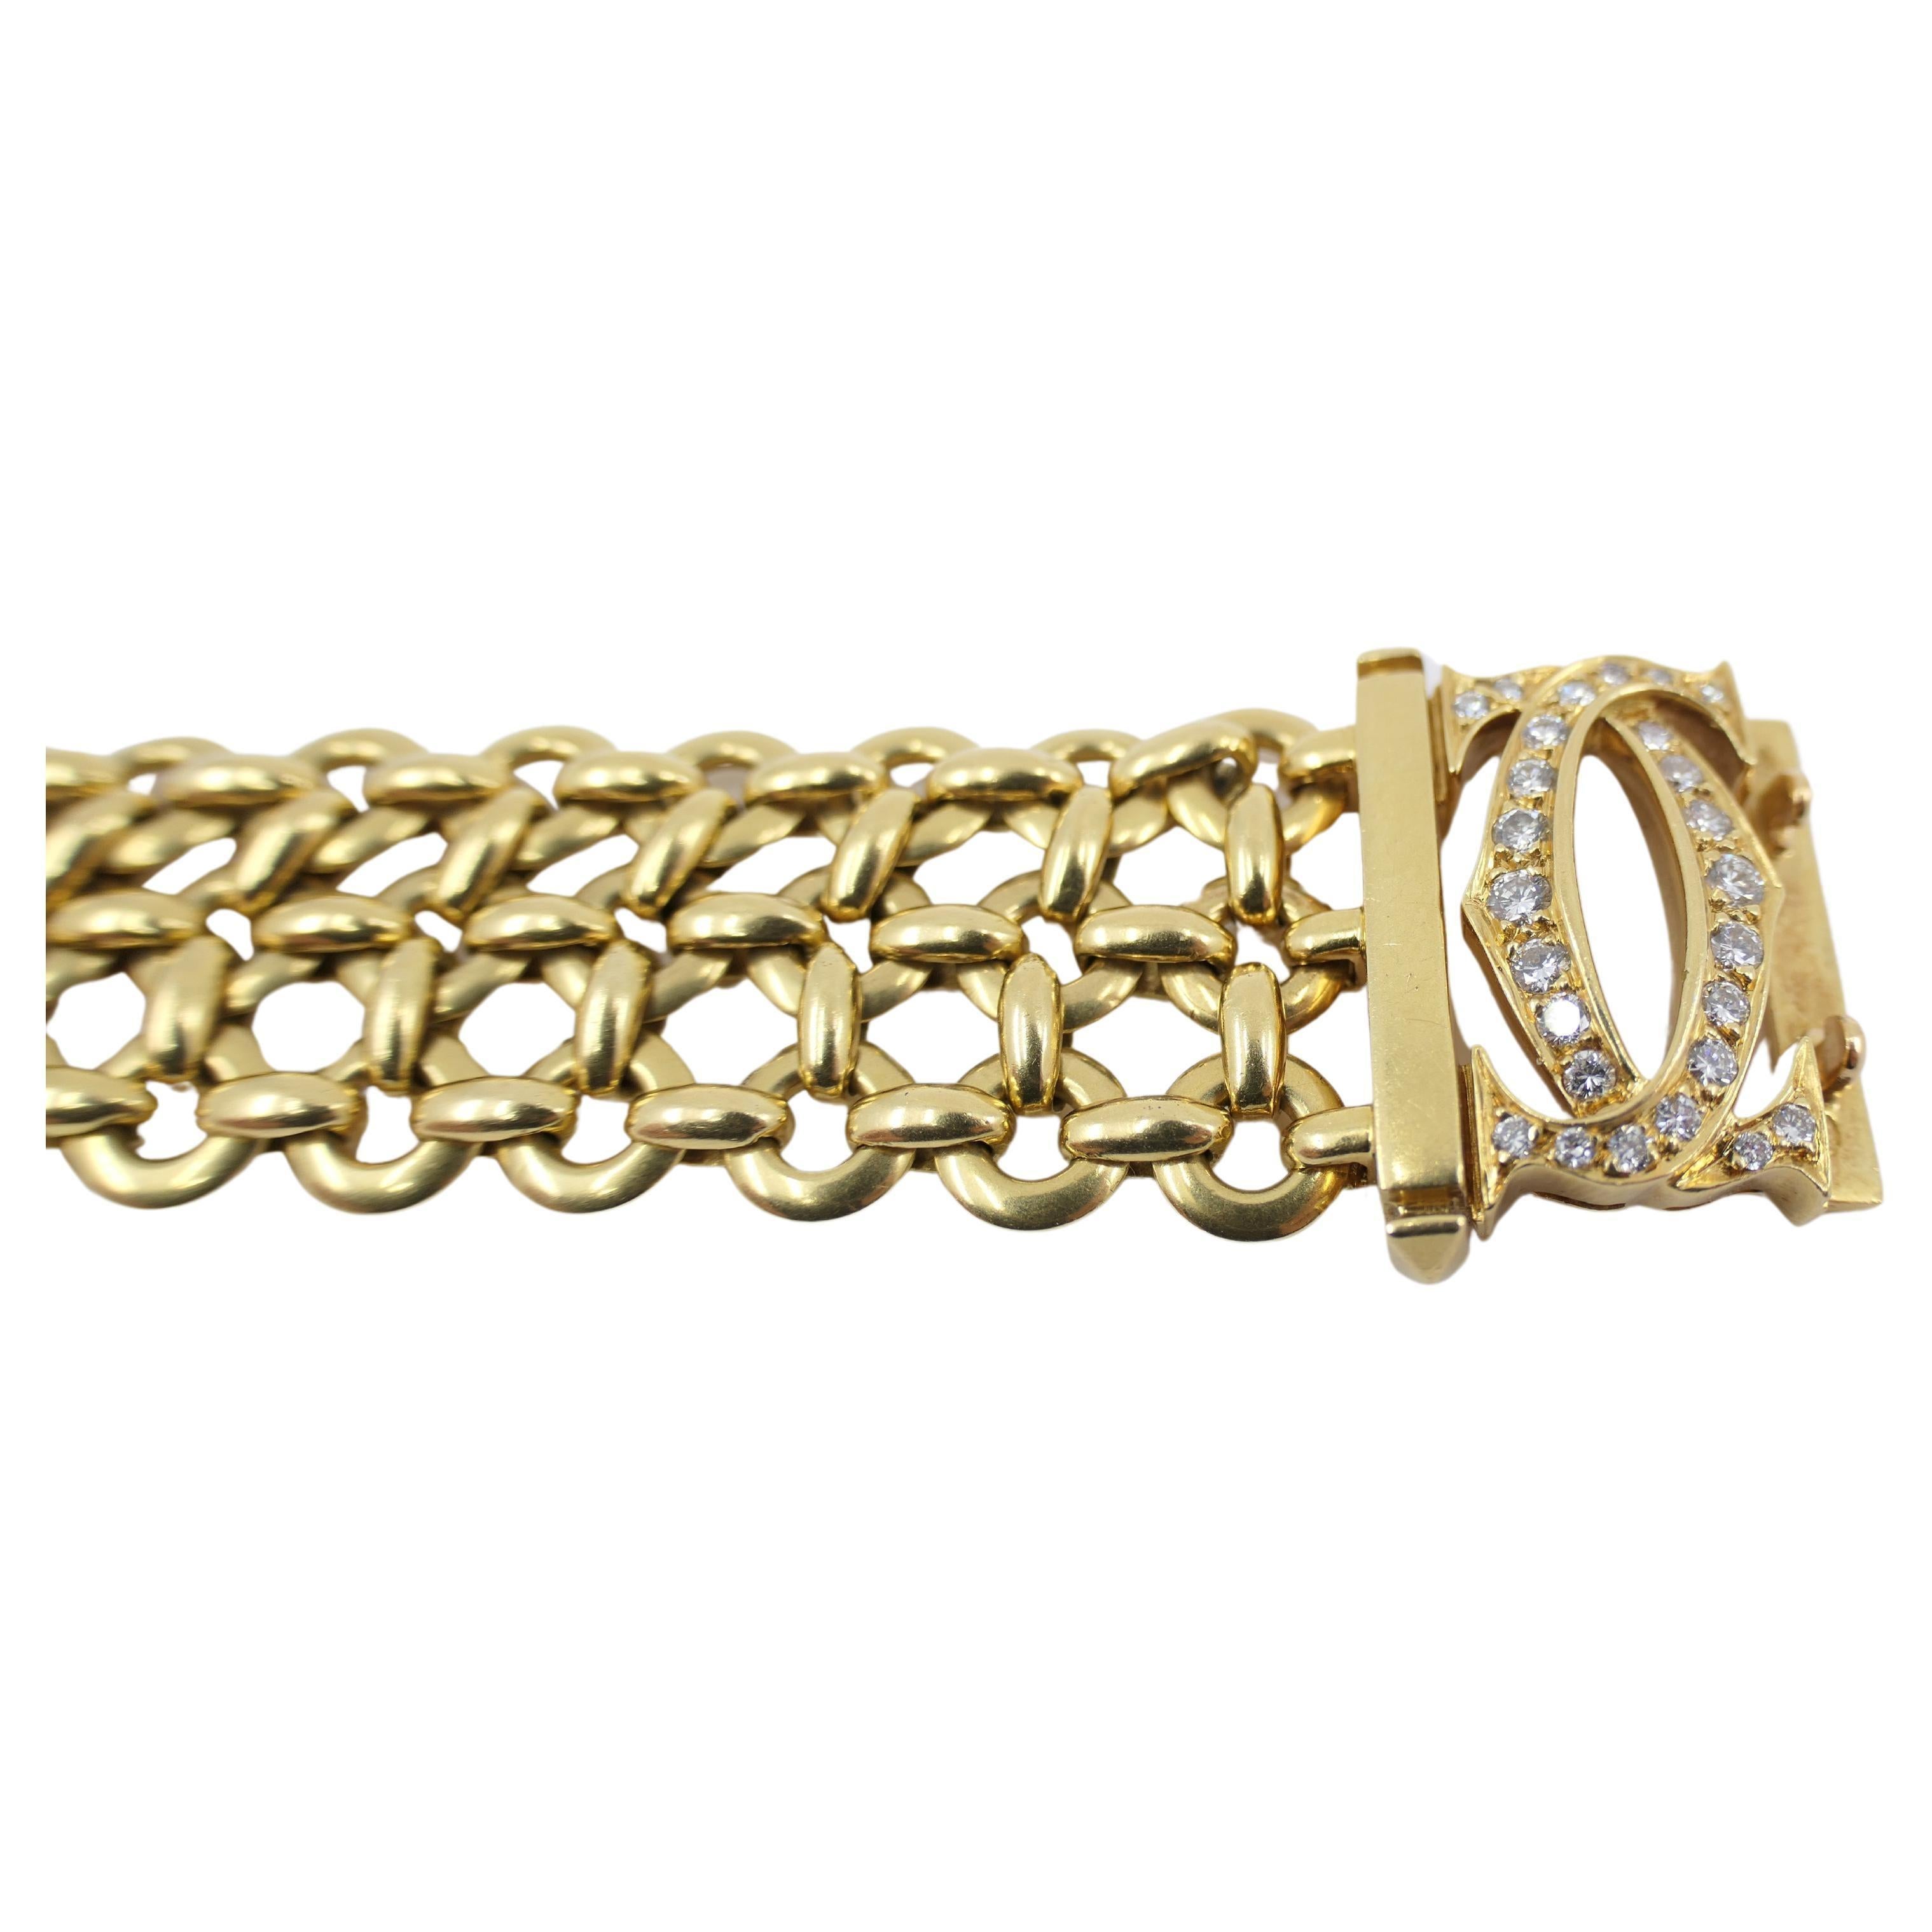 Vintage Cartier Double C Penelope Gold Diamond Bracelet In Excellent Condition For Sale In Beverly Hills, CA